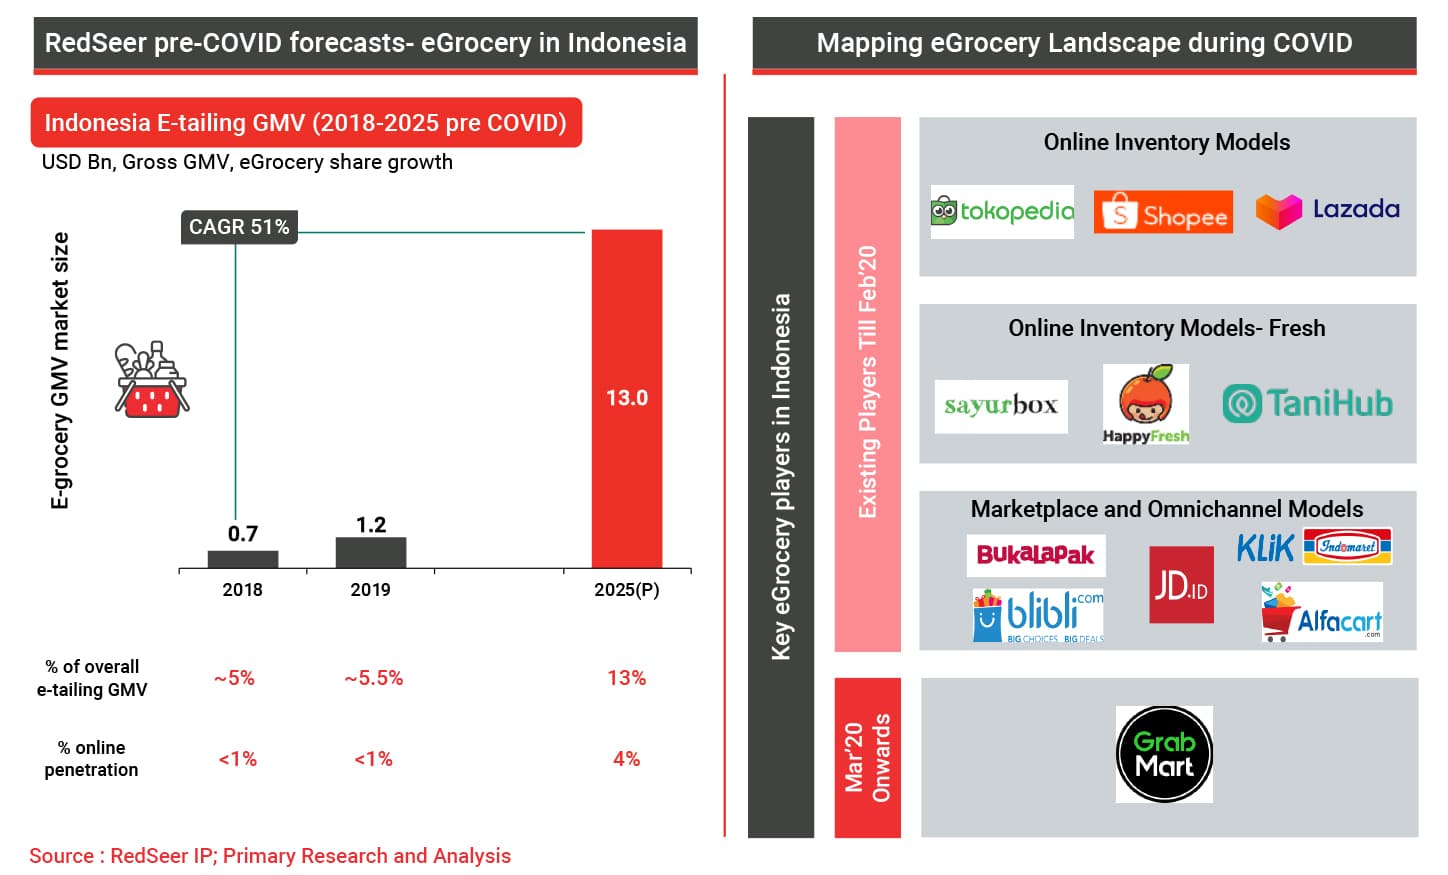 Redseer pre-Covid forecasts-eGrocery in Indonesia